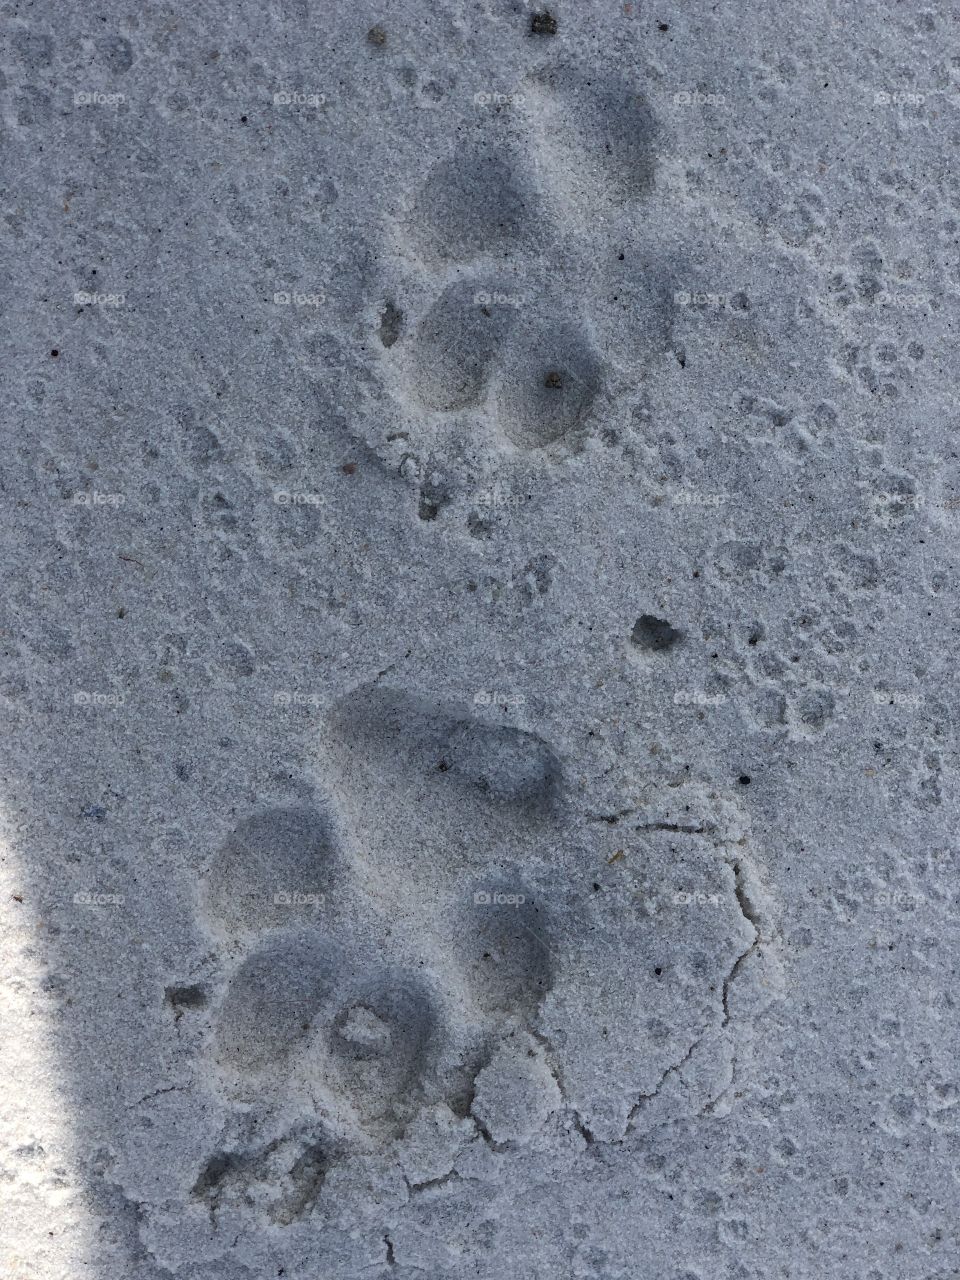 Pawprints in the sand